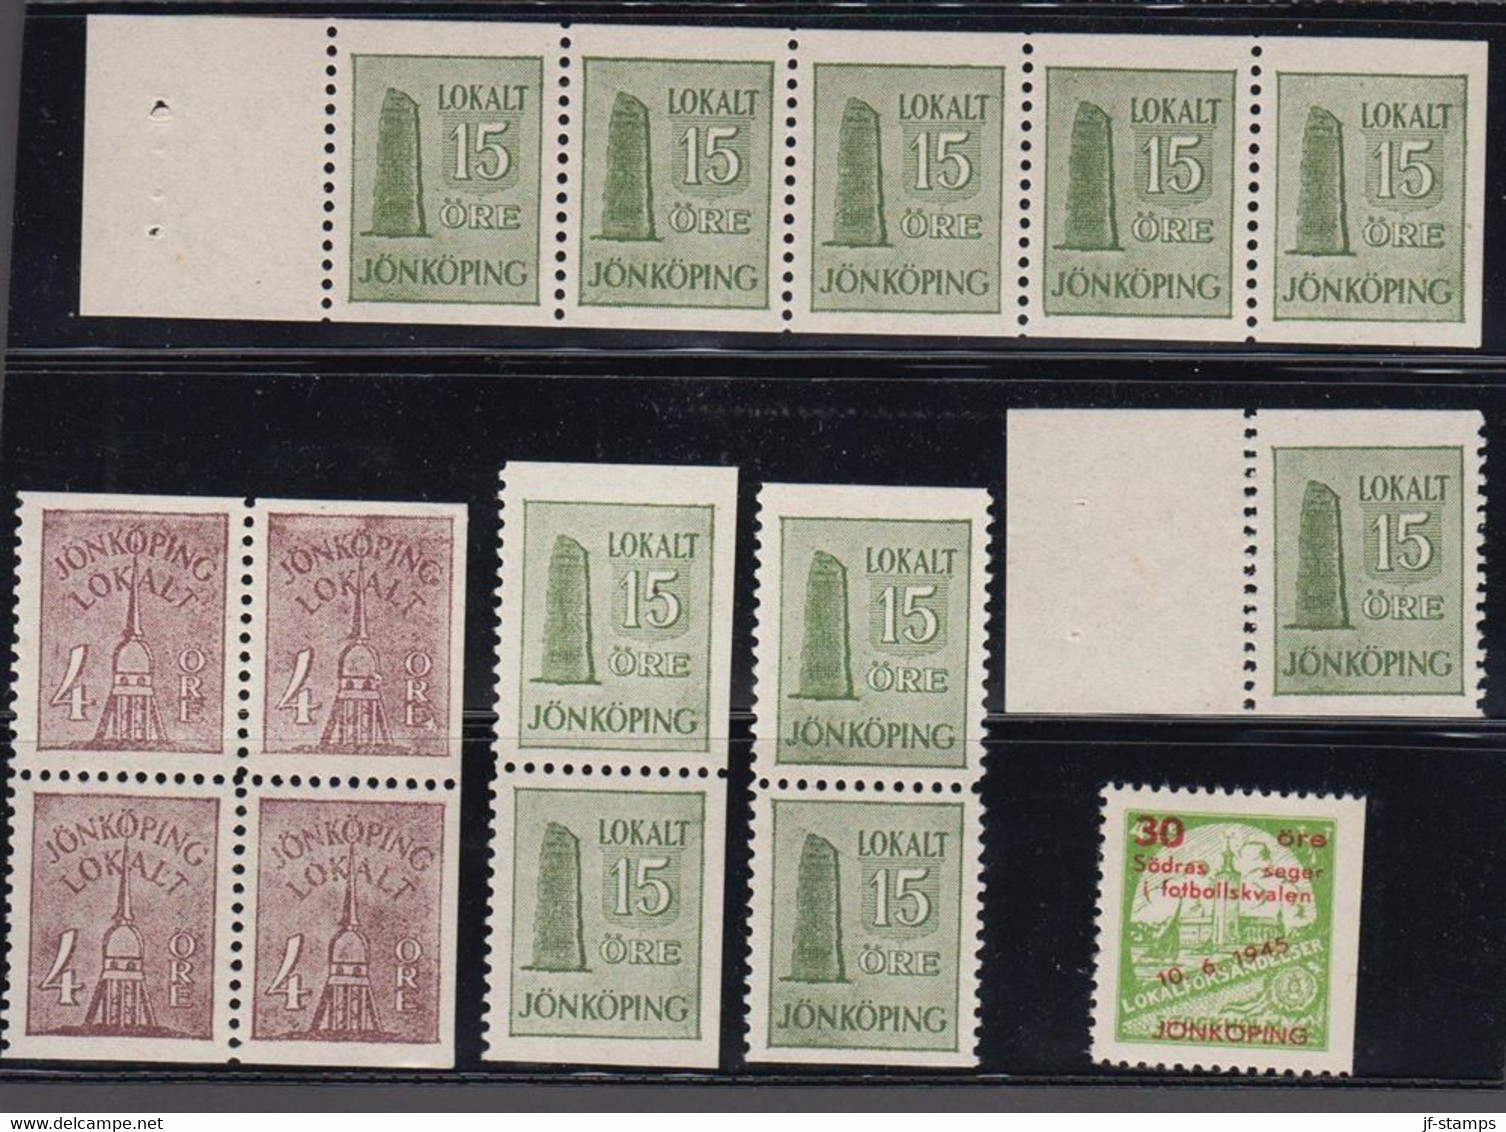 1945. SVERIGE. JÖNKÖPING LOKALT. Selection Of 15 Seals Both Hinged And Never Hinged. Including The Overpri... - JF520096 - Emisiones Locales